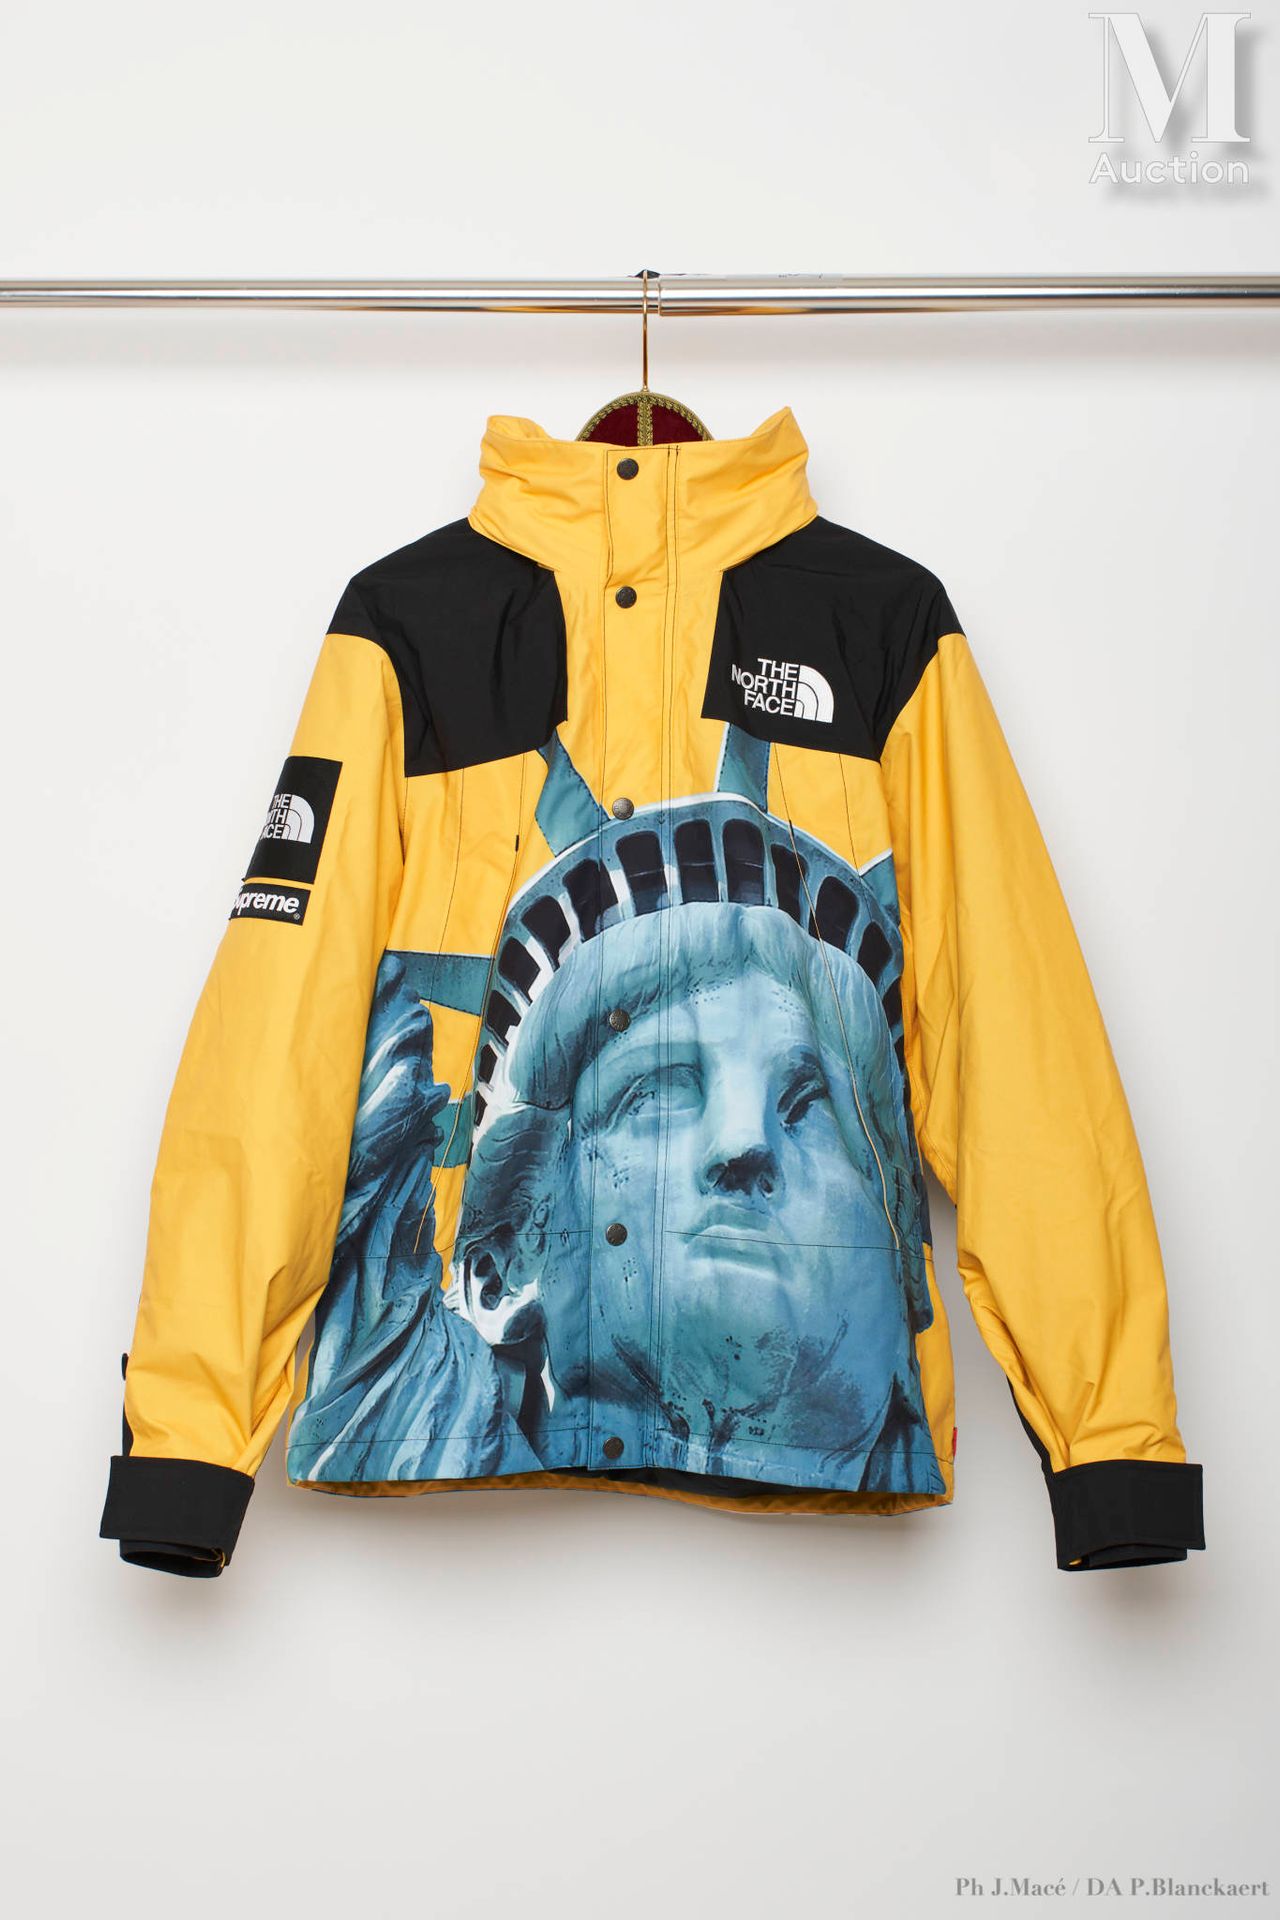 SUPREME X THE NORTH FACE MOUTAIN LIBERTY" JACKET
in yellow and black nylon with &hellip;